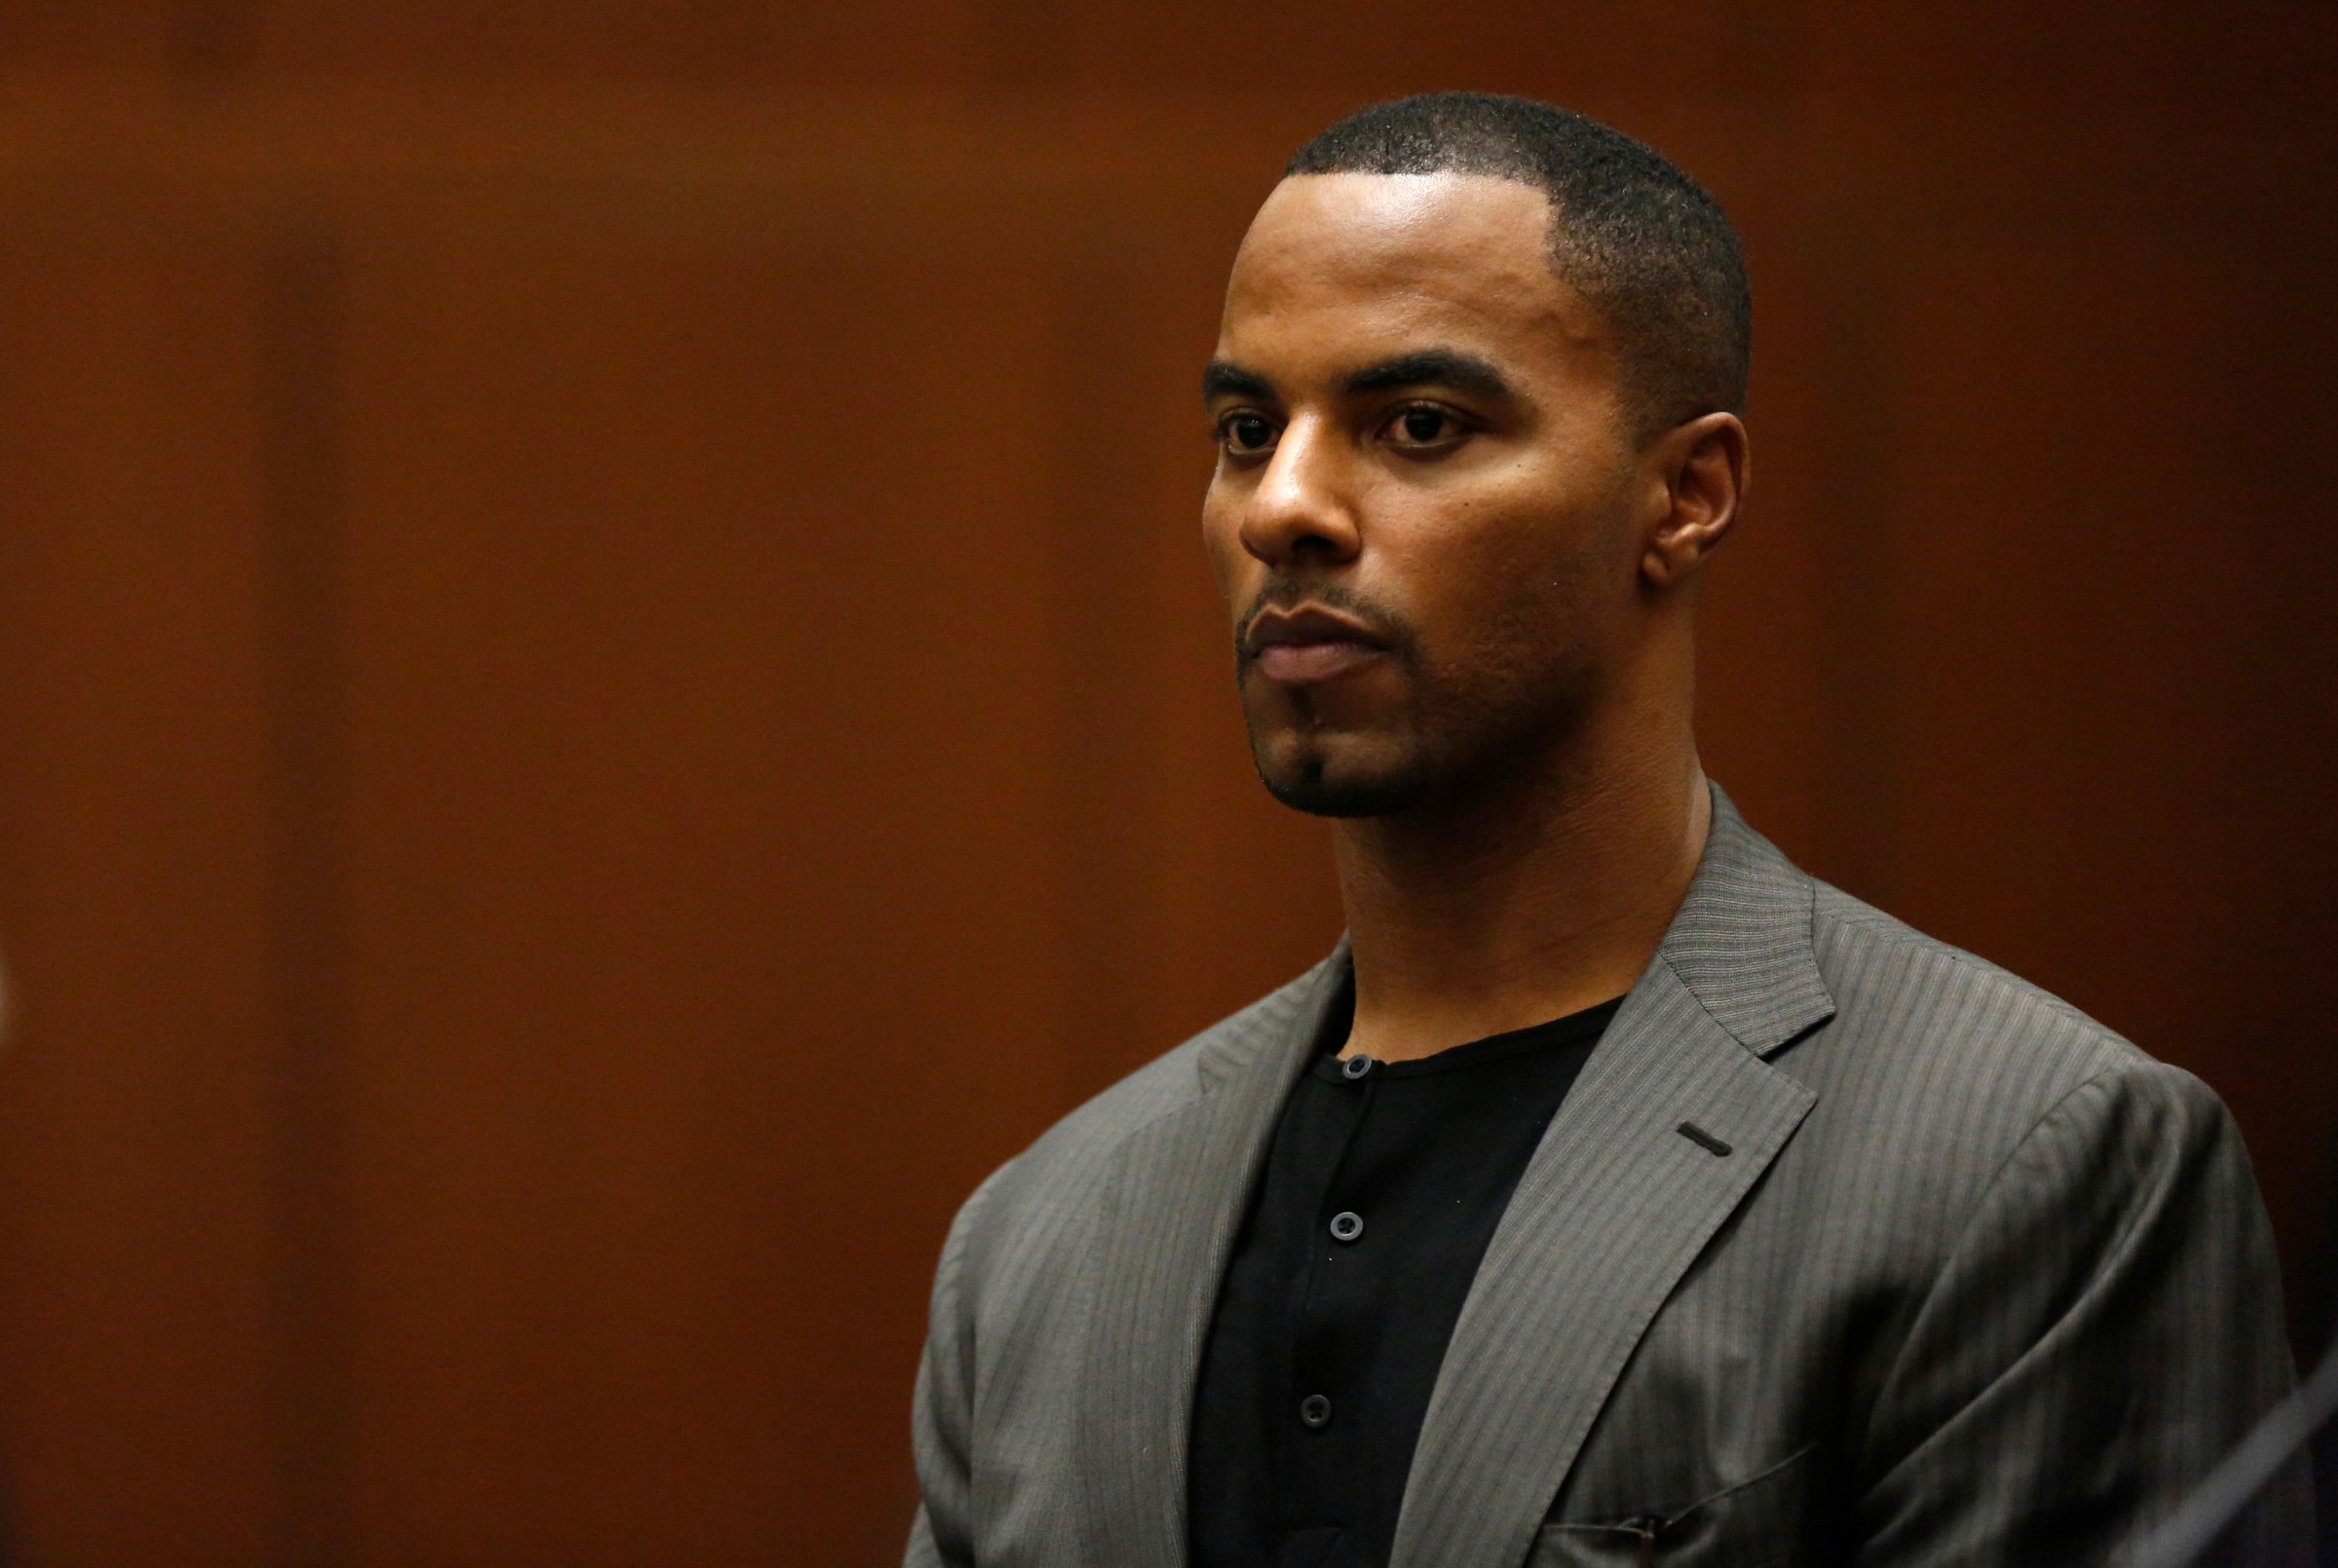 Former professional football player Darren Sharper appears for his arraignment in Los Angeles, Ca on Feb. 20, 2014